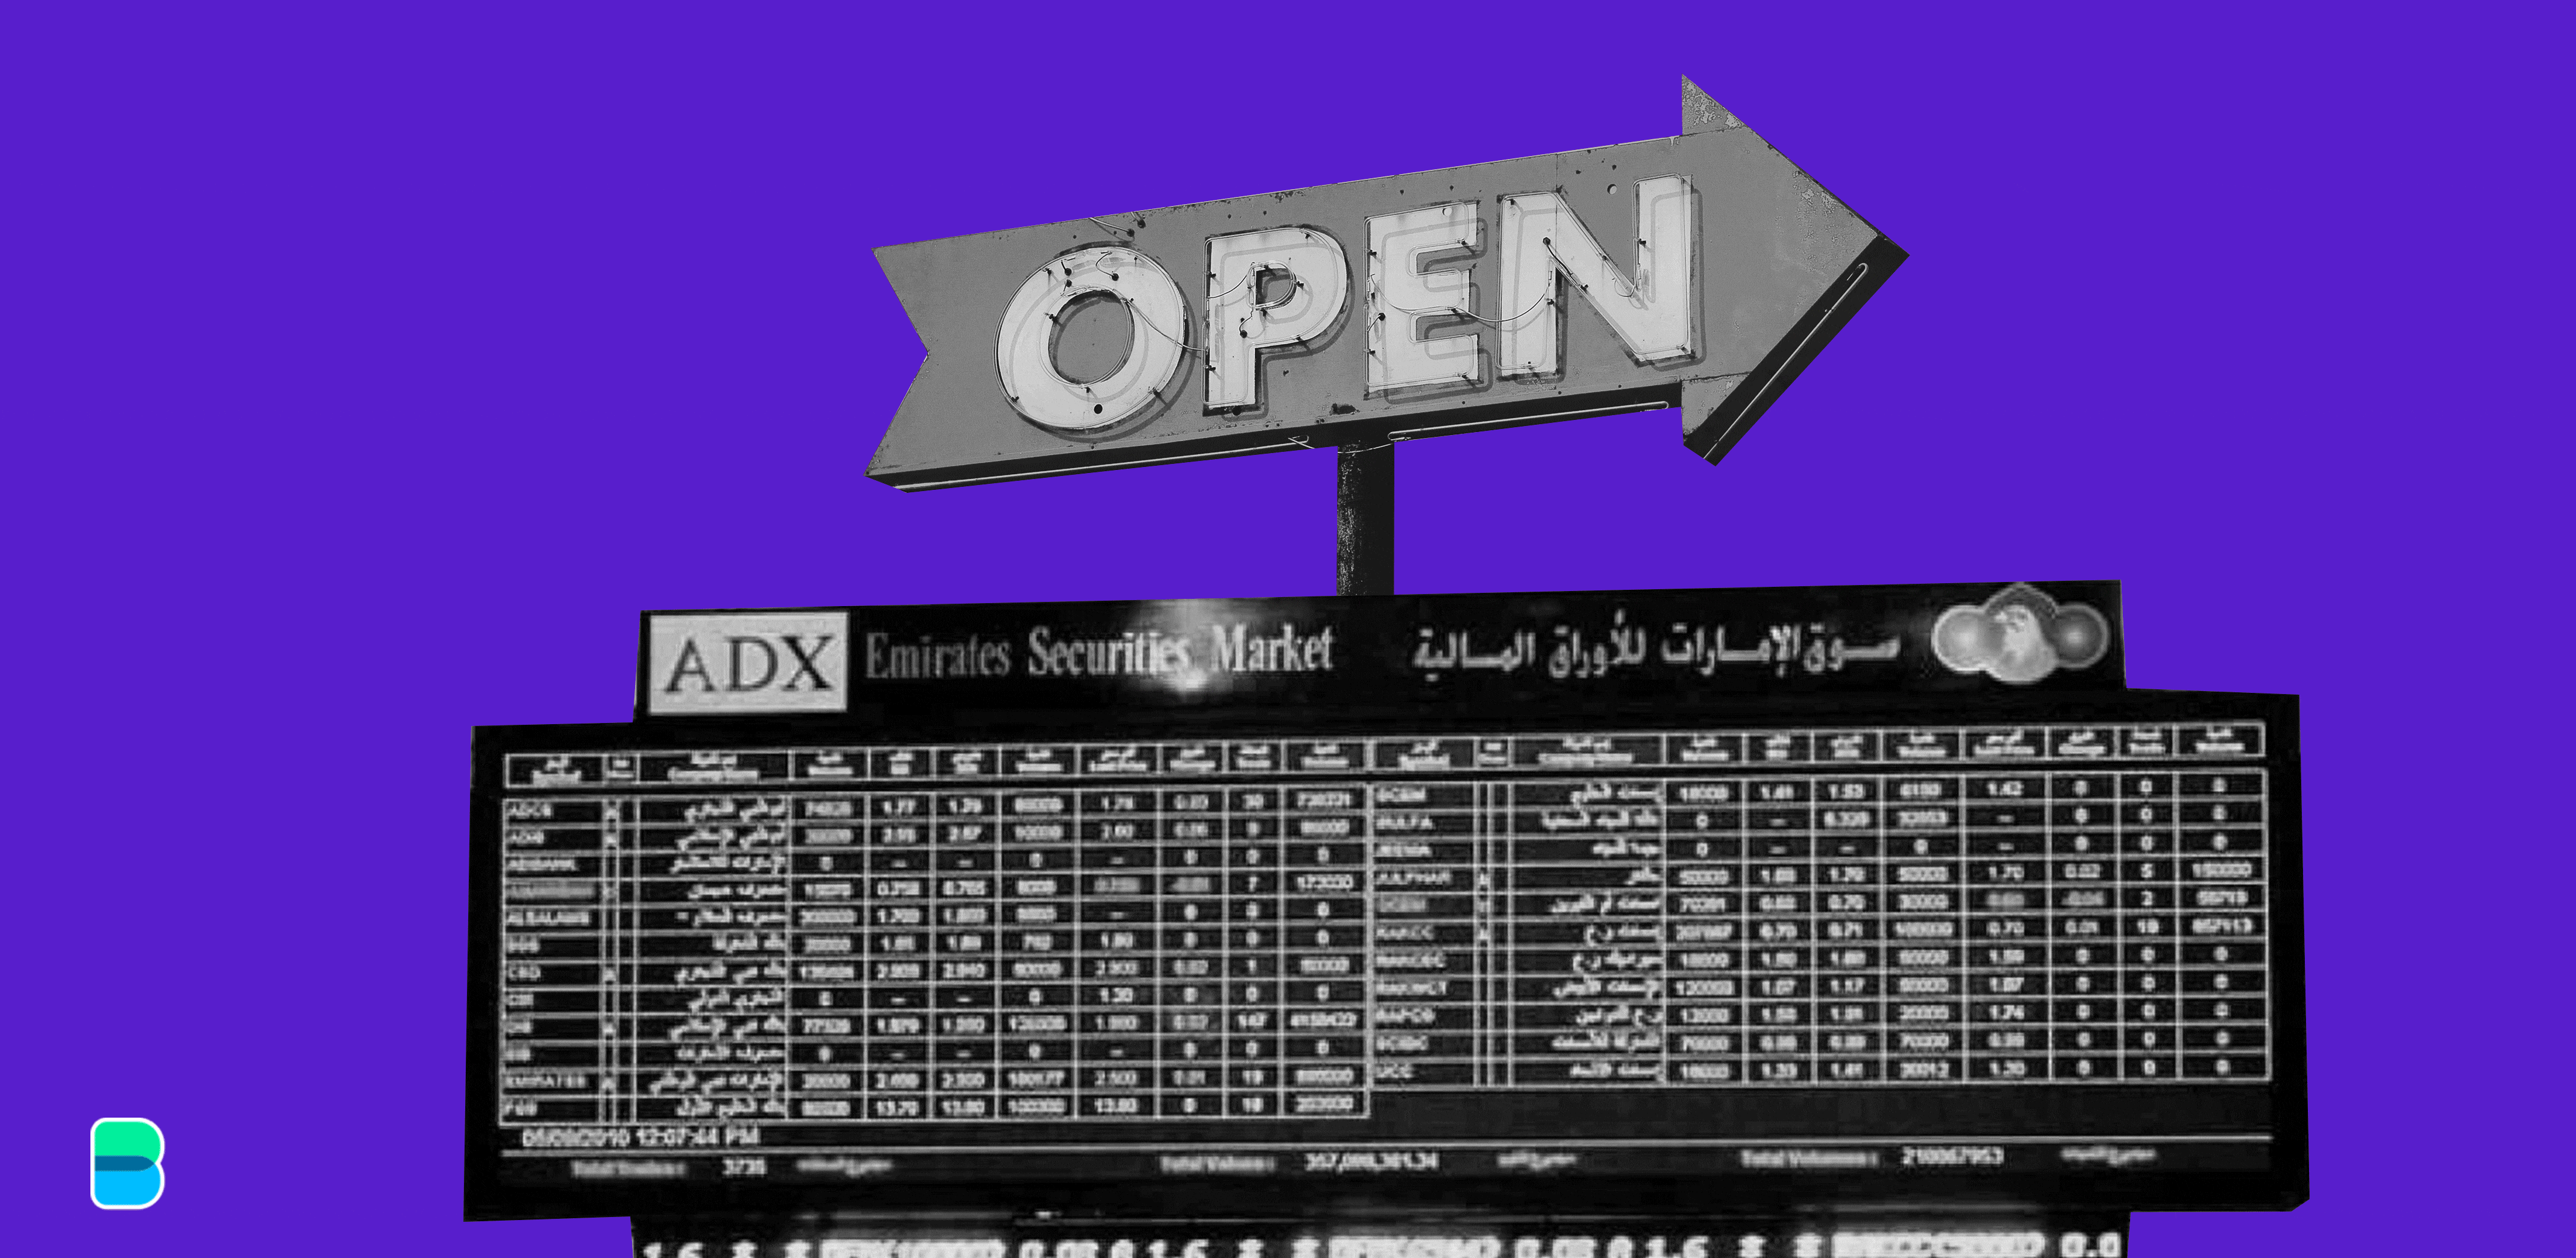 UAE bourses are now open till late